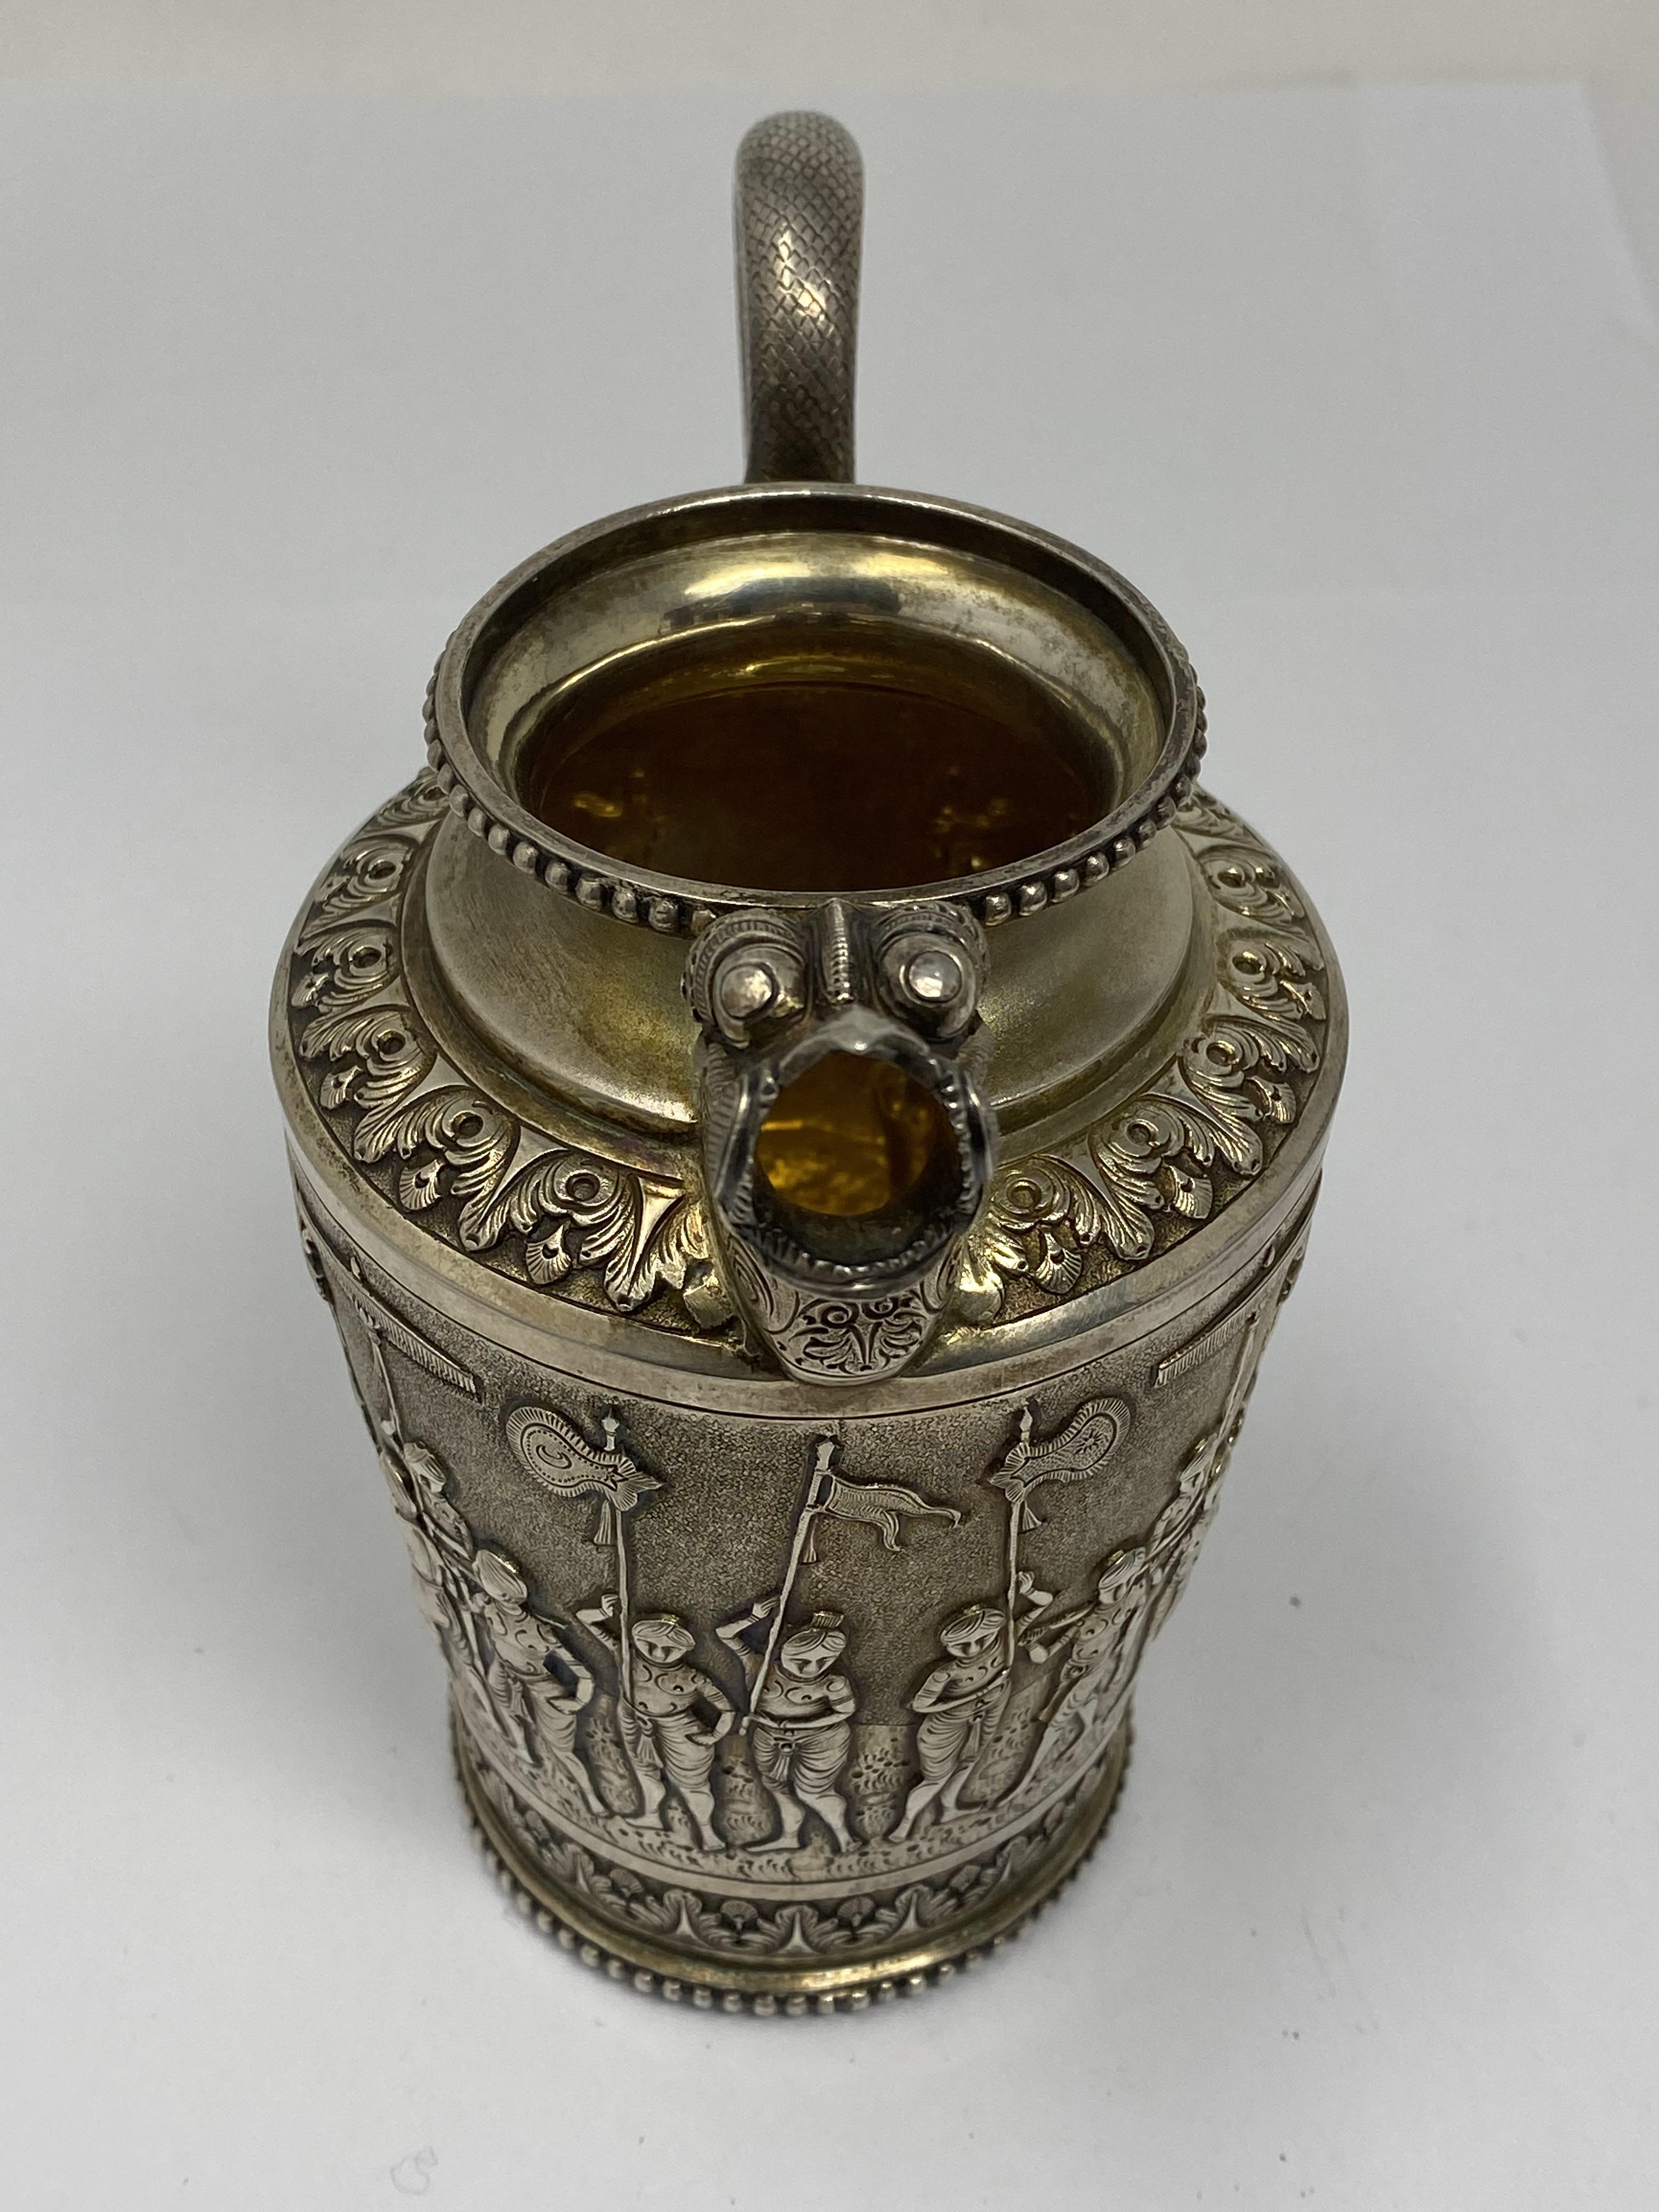 ˜A PARCEL-GILT-SILVER TEA SET, ATTRIBUTED TO P. ORR AND SONS, MADRAS (CHENNAI), INDIA, CIRCA 1905-10 - Image 4 of 18